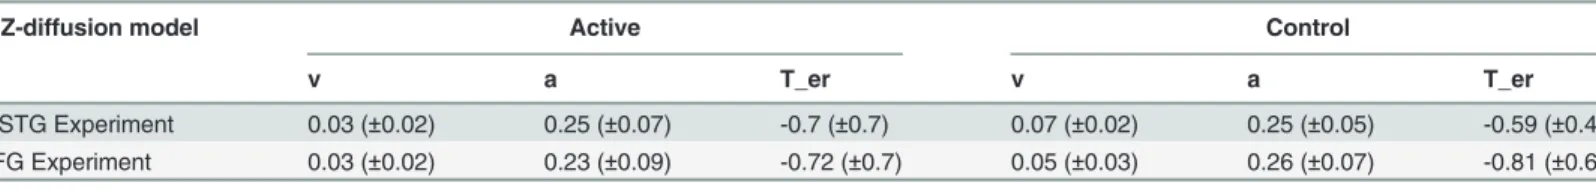 Table 2 shows the descriptive statistics for the diffusion model parameters (v, a, T_er)